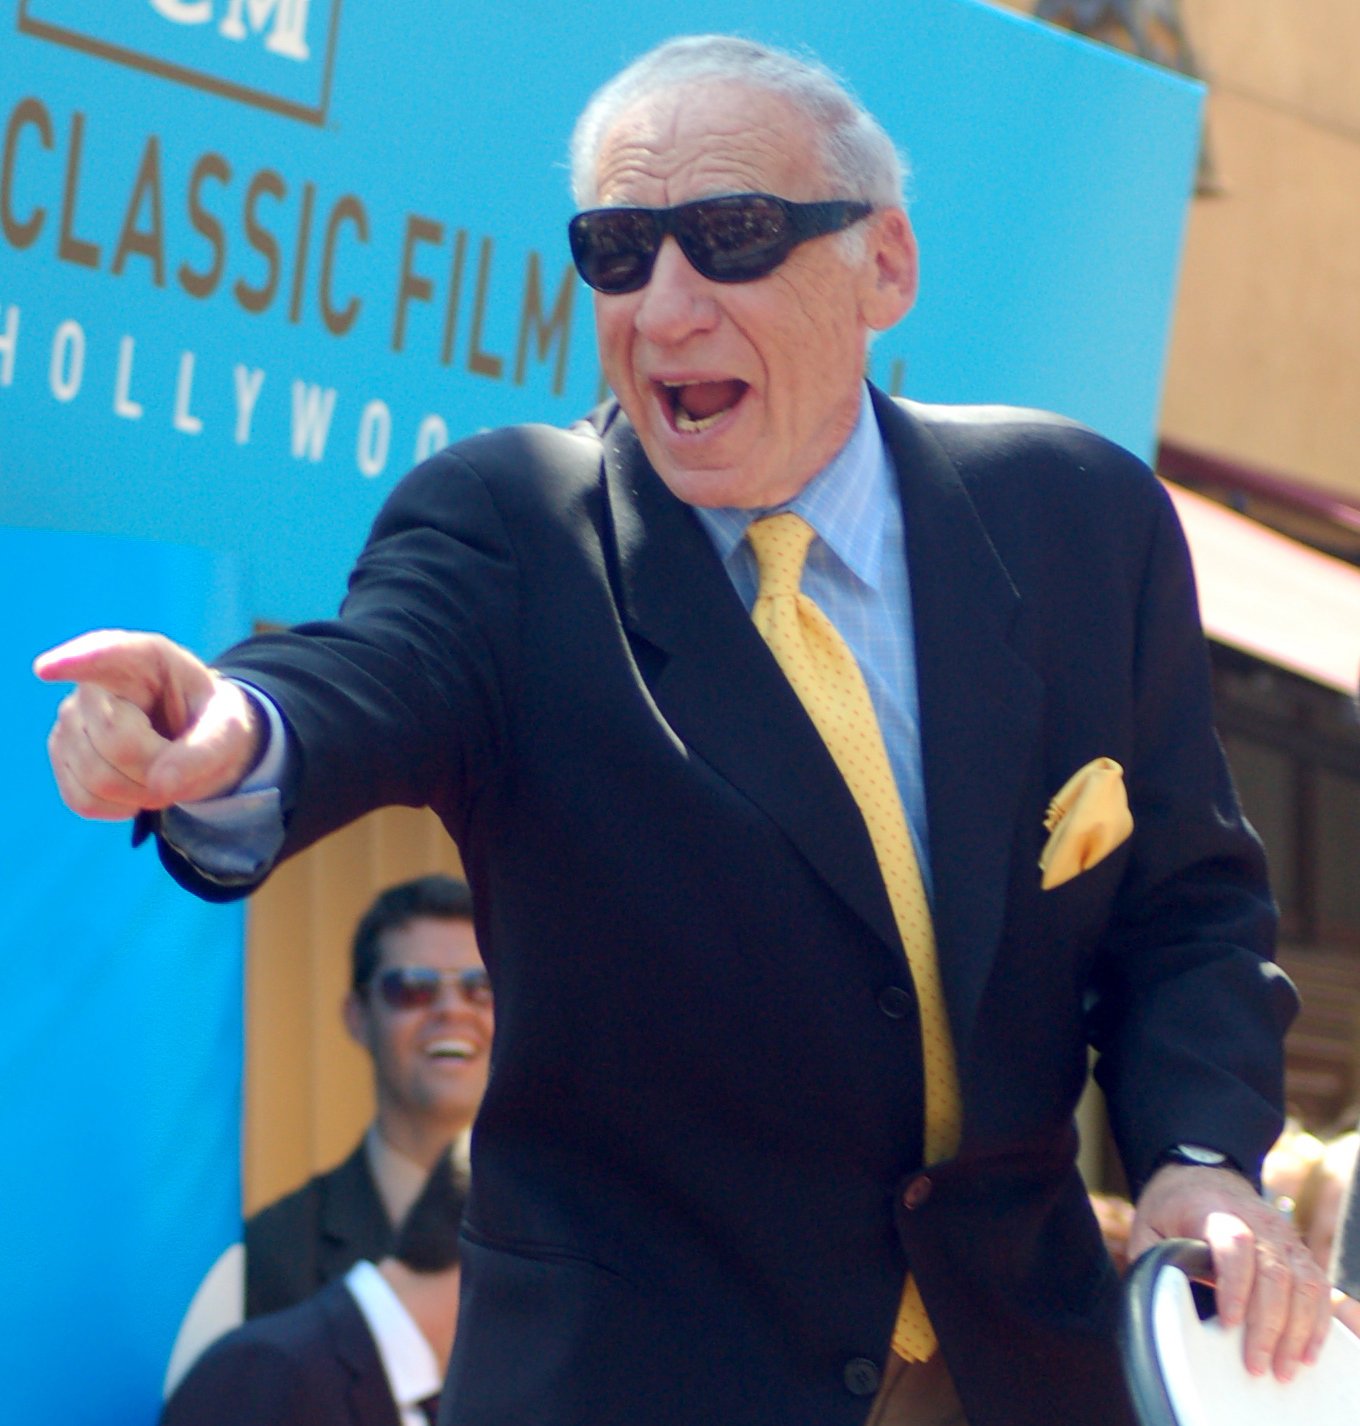 Mel Brooks at his Hollywood Walk of Fame ceremony, April 2010 | Source: Wikimedia Commons